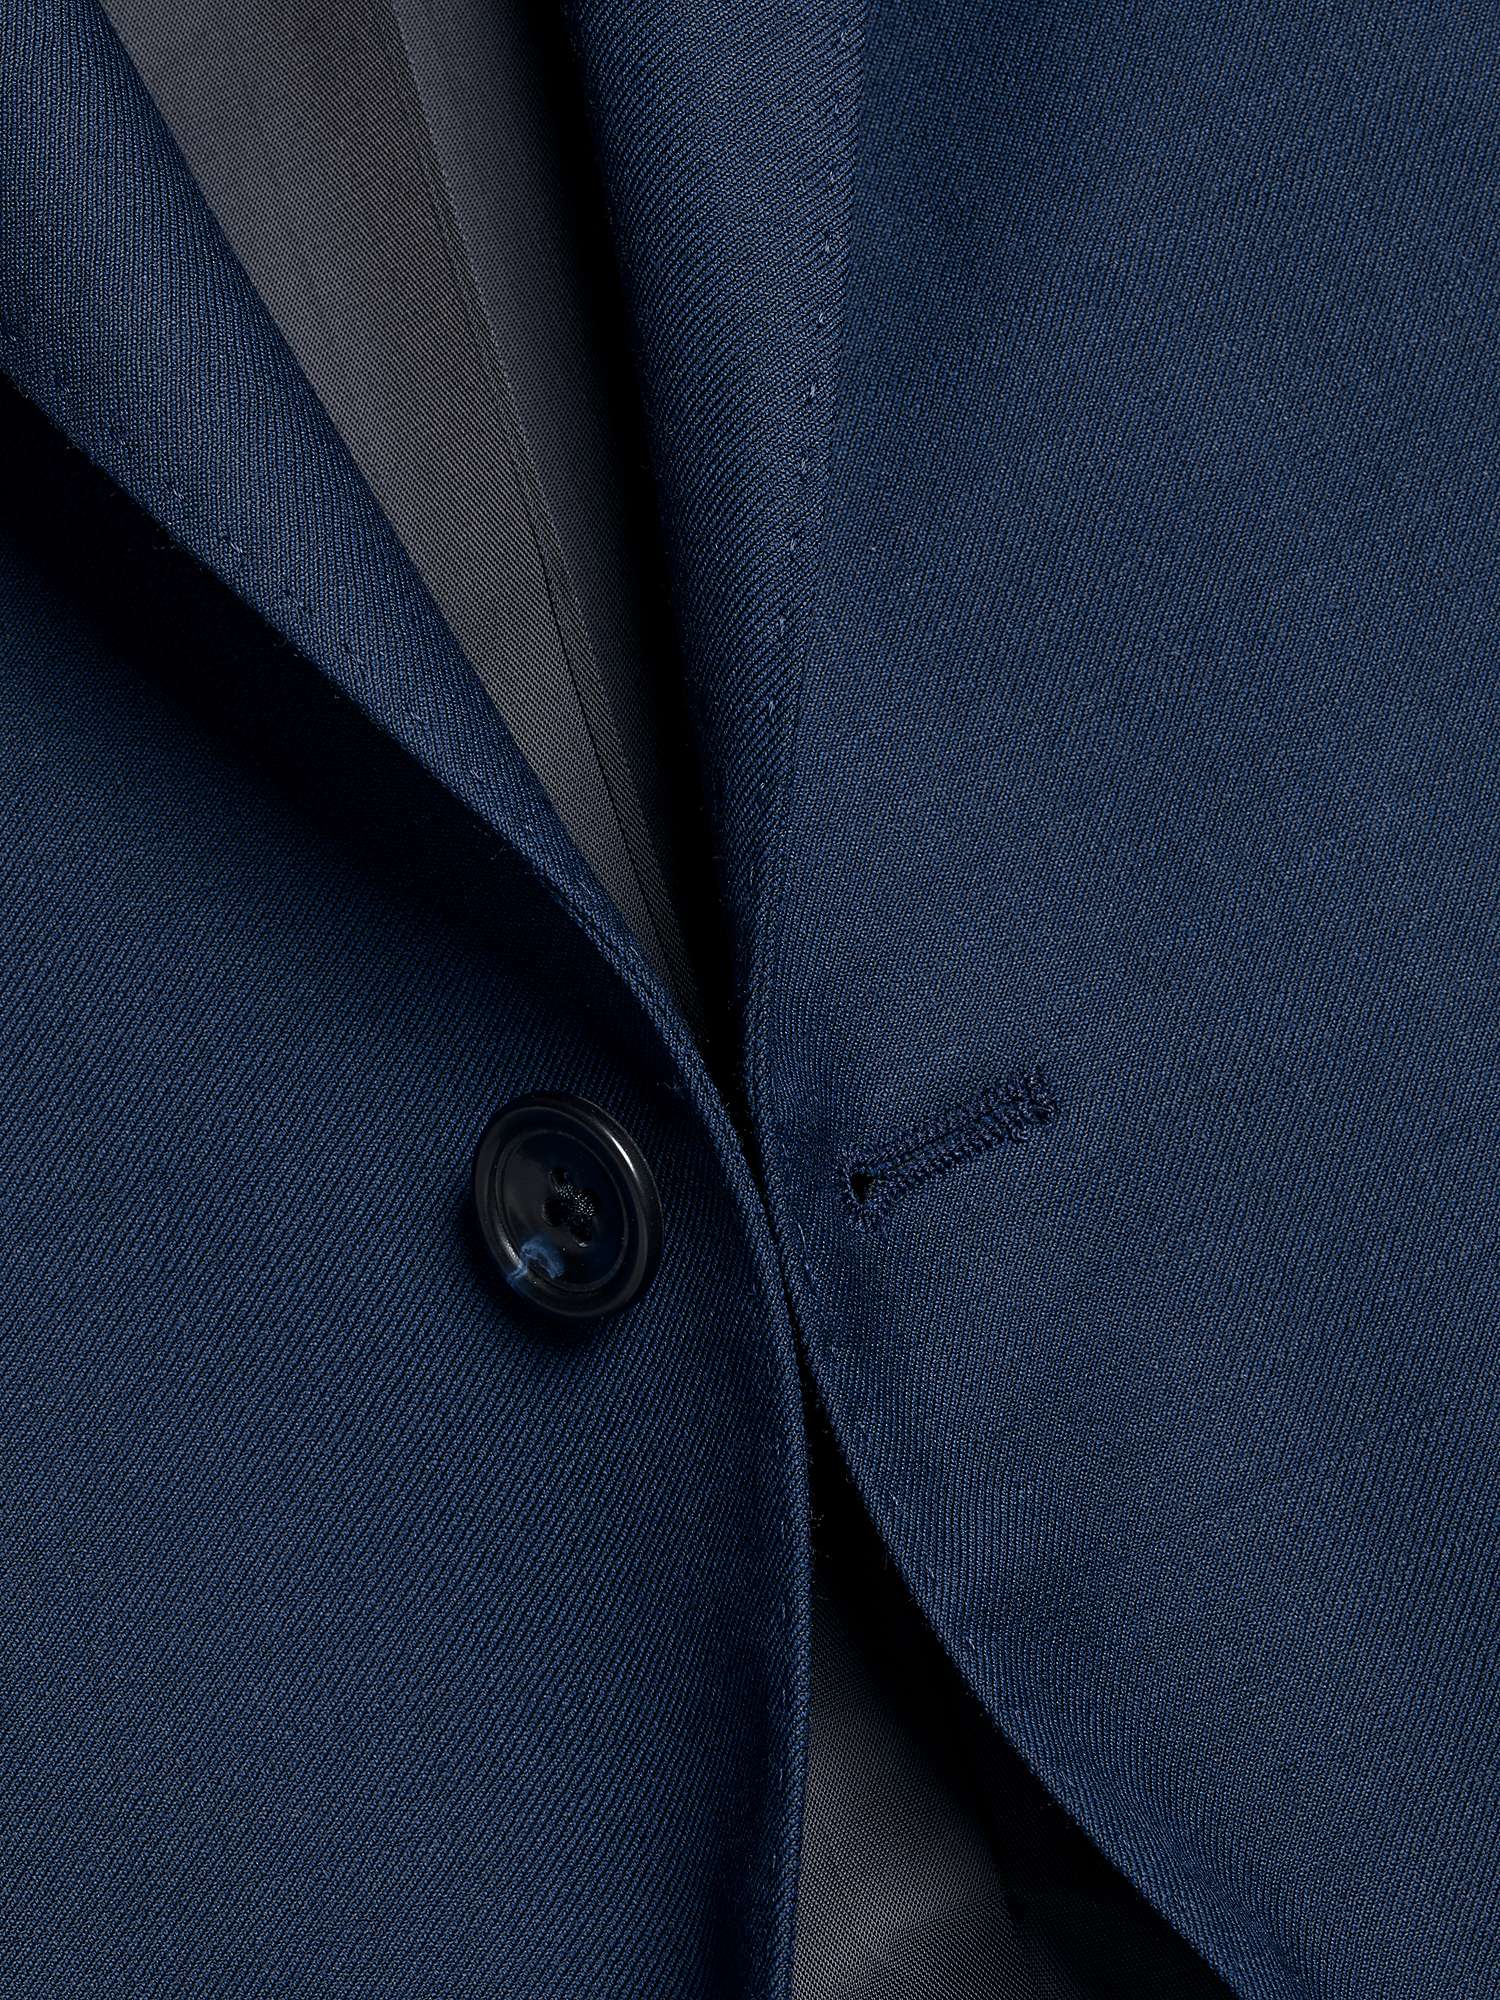 Buy Charles Tyrwhitt Slim Fit Natural Stretch Twill Suit Jacket, Royal Blue Online at johnlewis.com